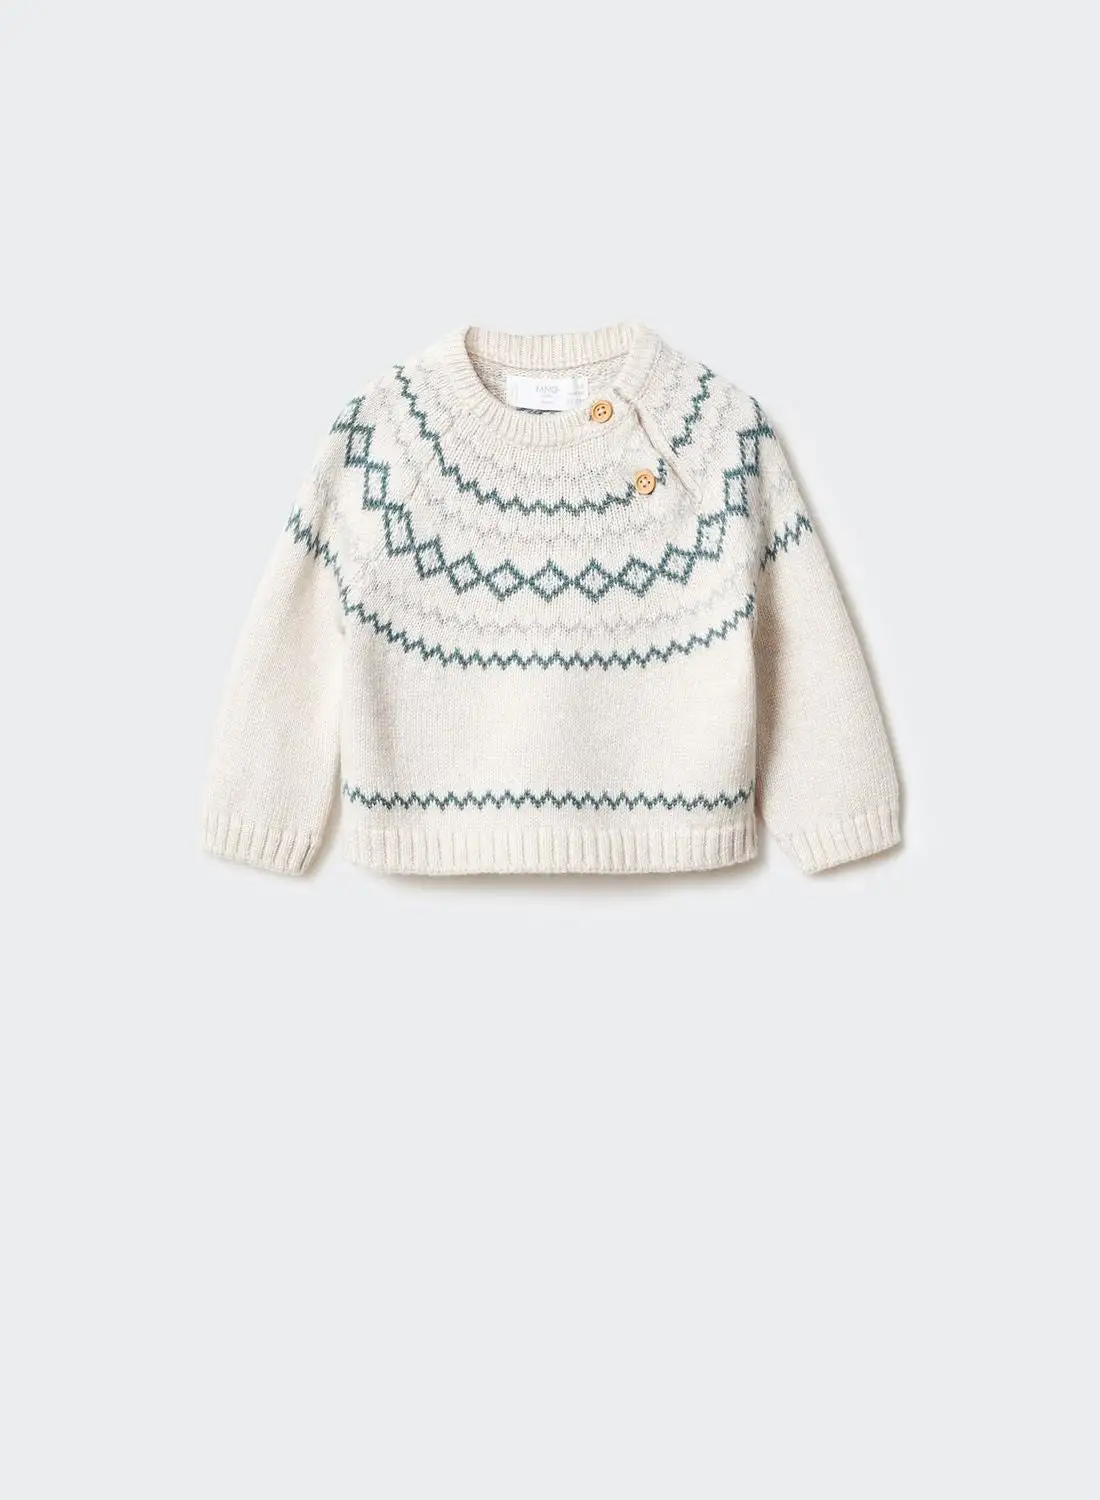 MANGO Infant Contrast Knitted Sweater